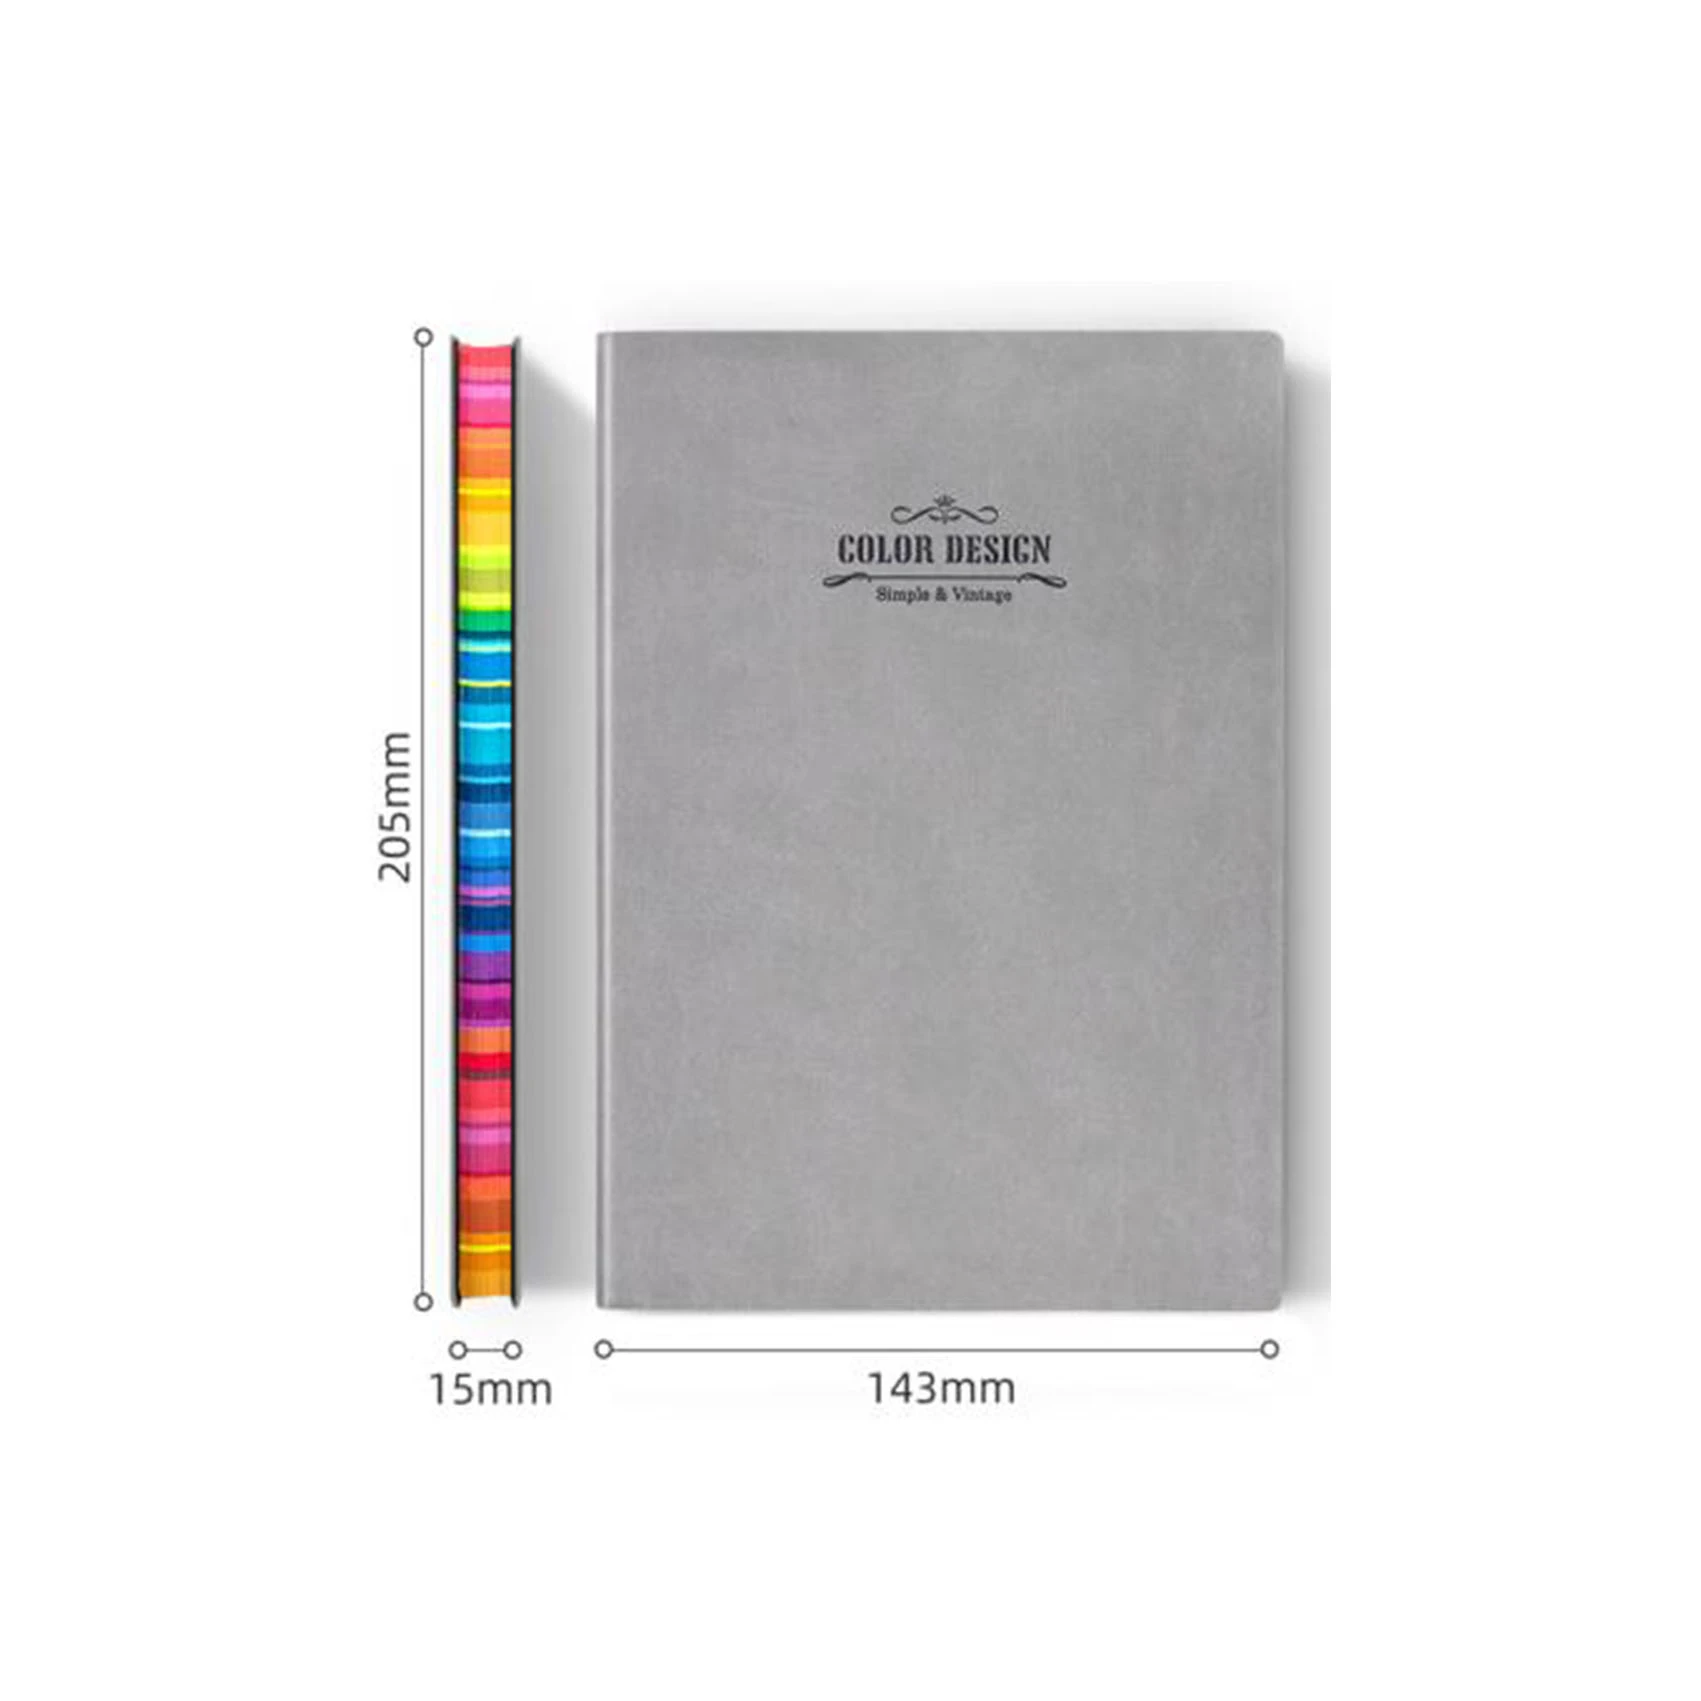 High performance colorful quality inner core 25K size 112 sheets business office stationery notebook